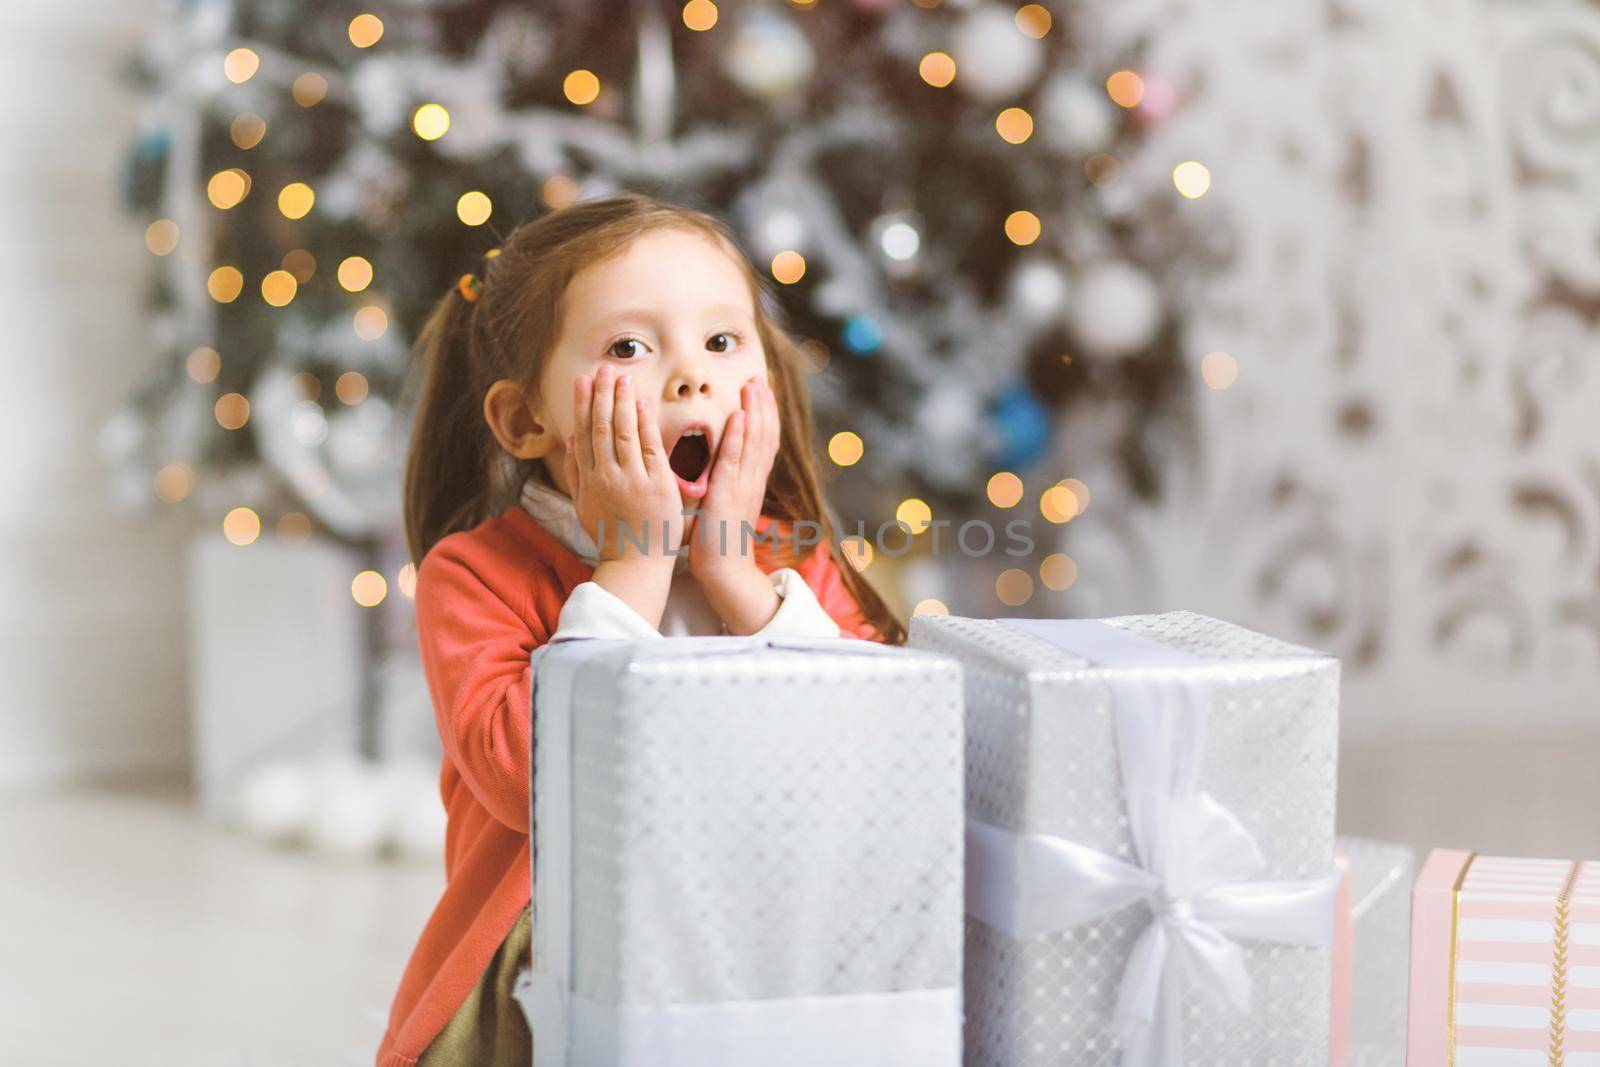 Cute little girl surprised by the abundance of Christmas gifts by a Christmas tree in cozy room.